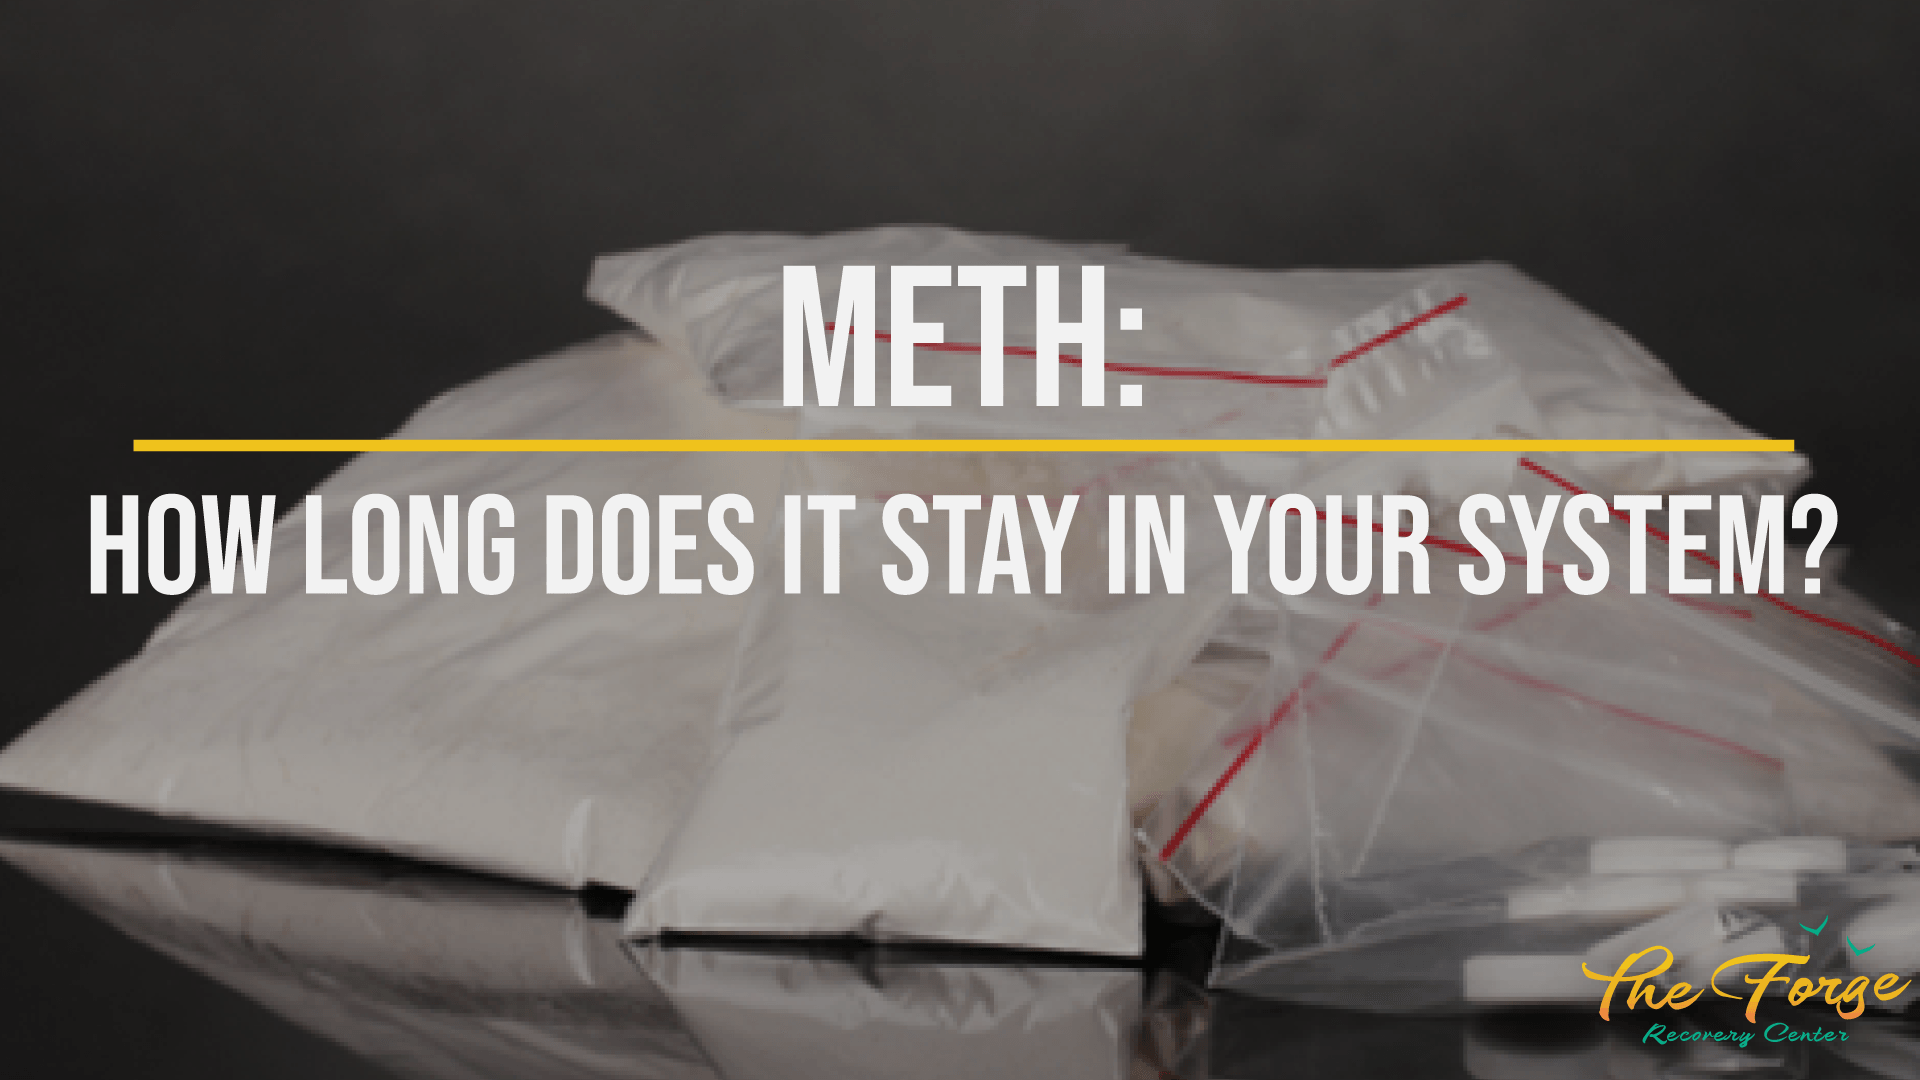 Methamphetamine: How Long Does Meth Stay in Your System